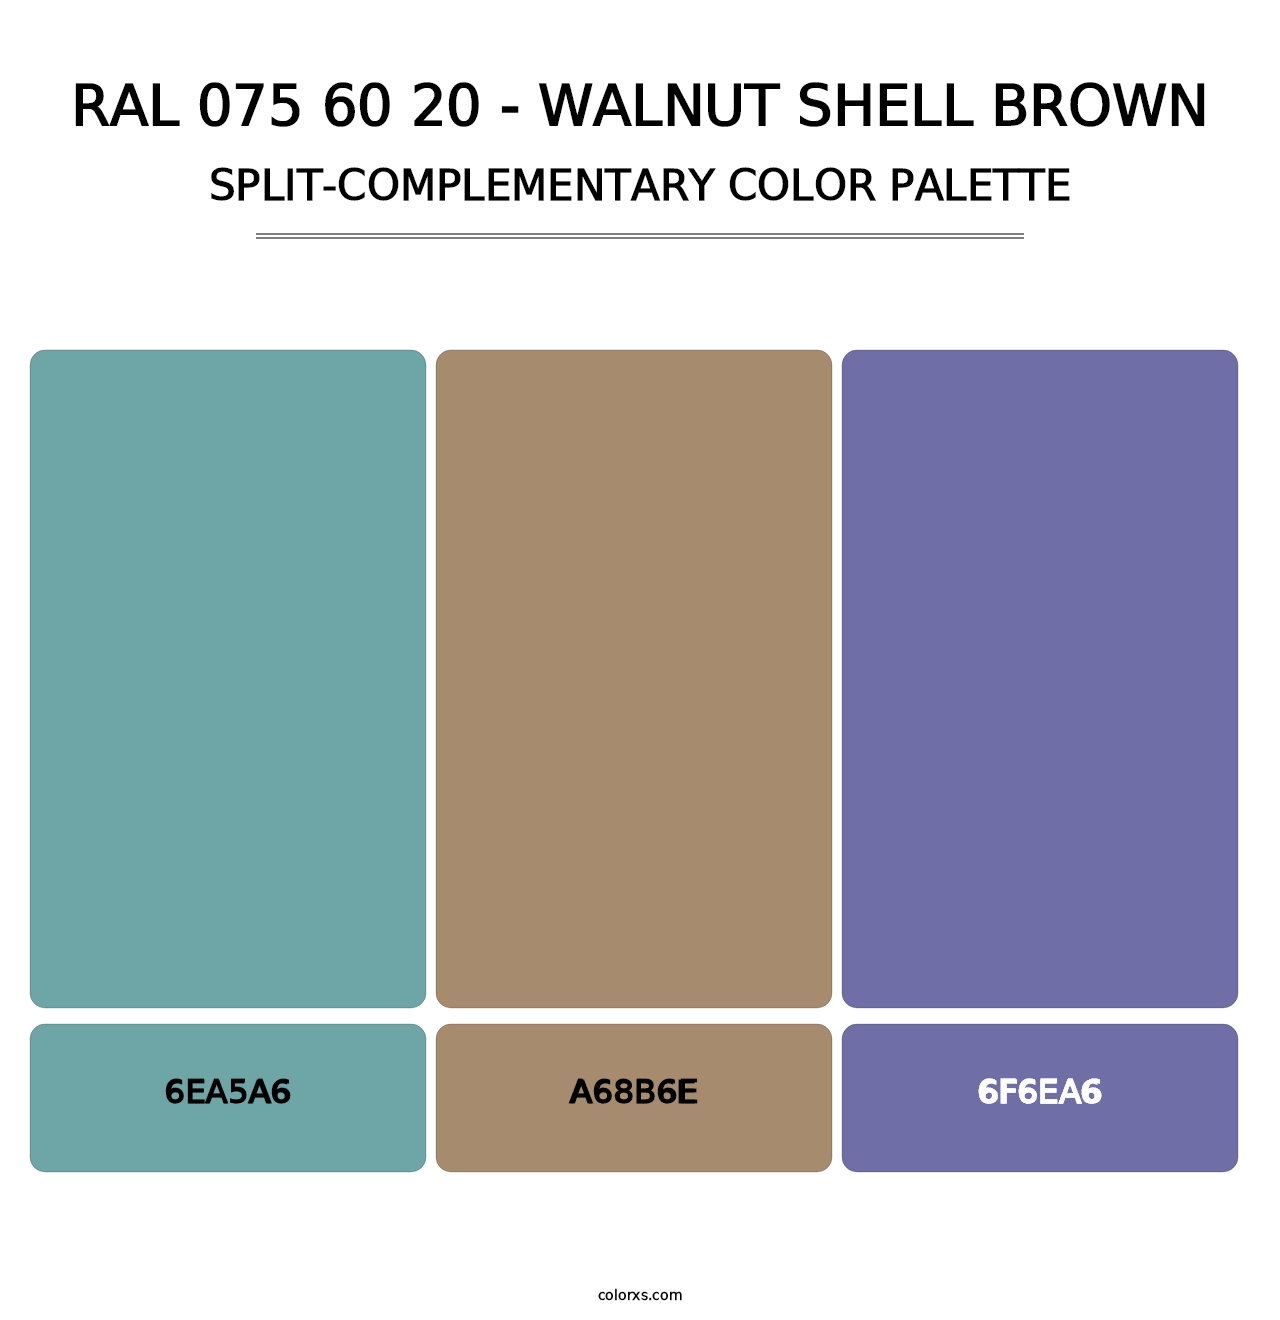 RAL 075 60 20 - Walnut Shell Brown - Split-Complementary Color Palette